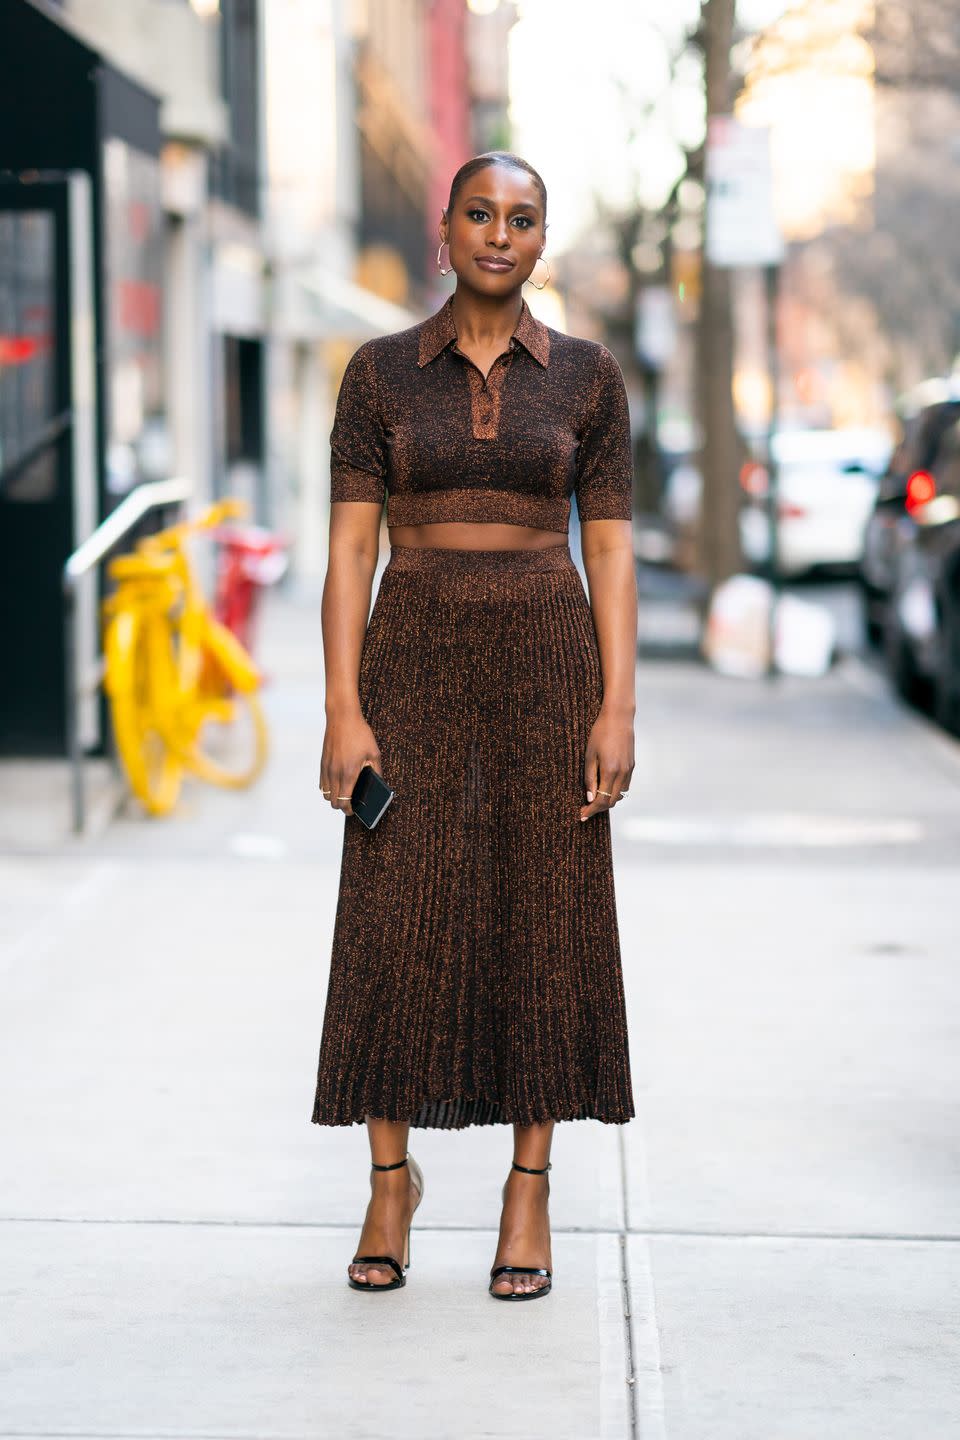 6) Shimmery Crop Top and Pleated Skirt